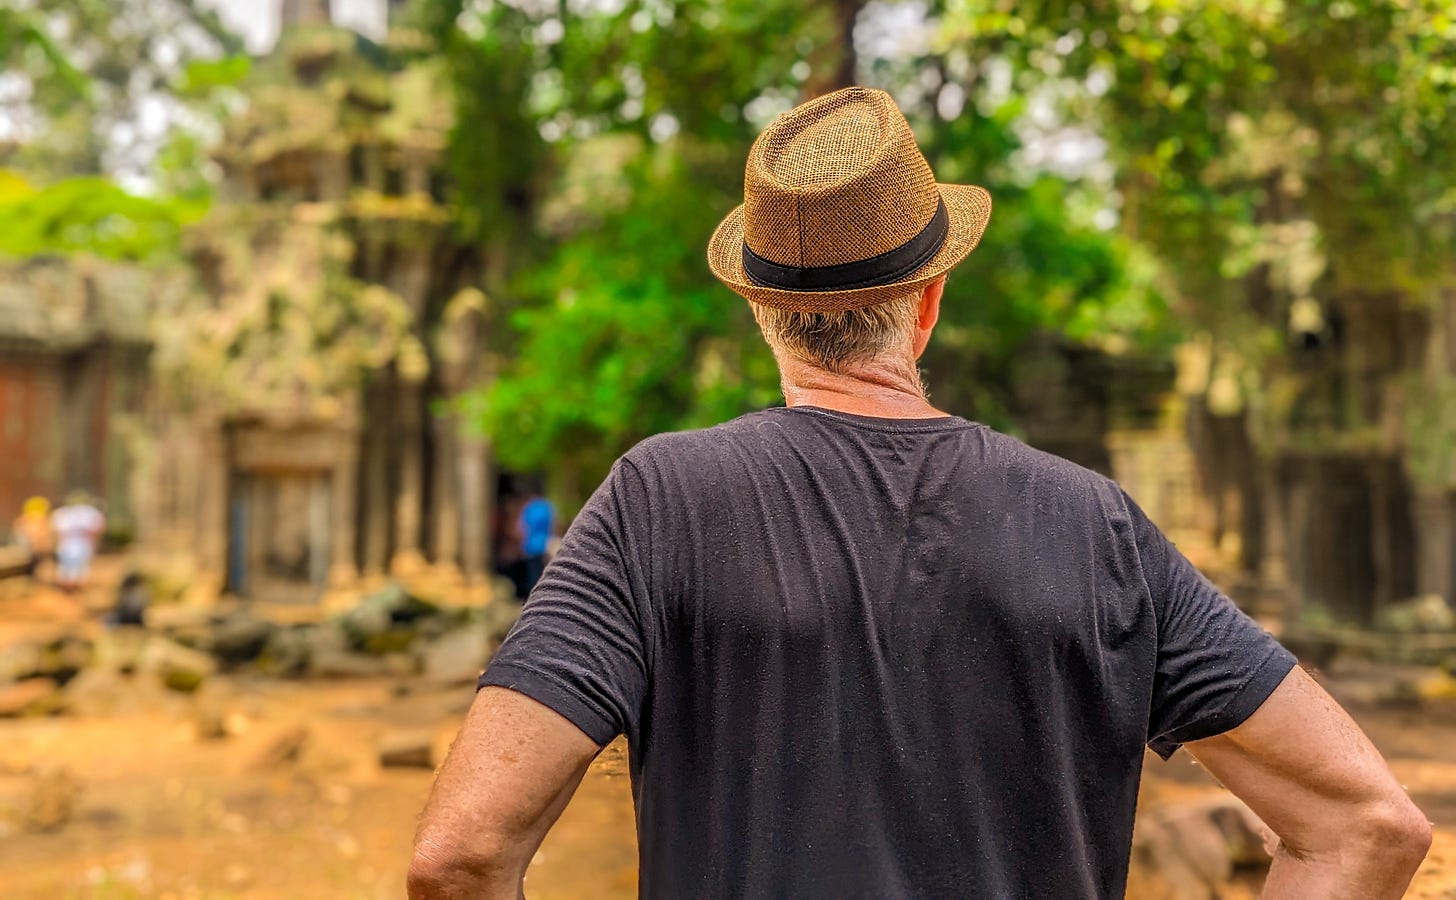 Michael wearing a brown straw hat and seen from behind as he looks at some ruins of Angkor Wat.